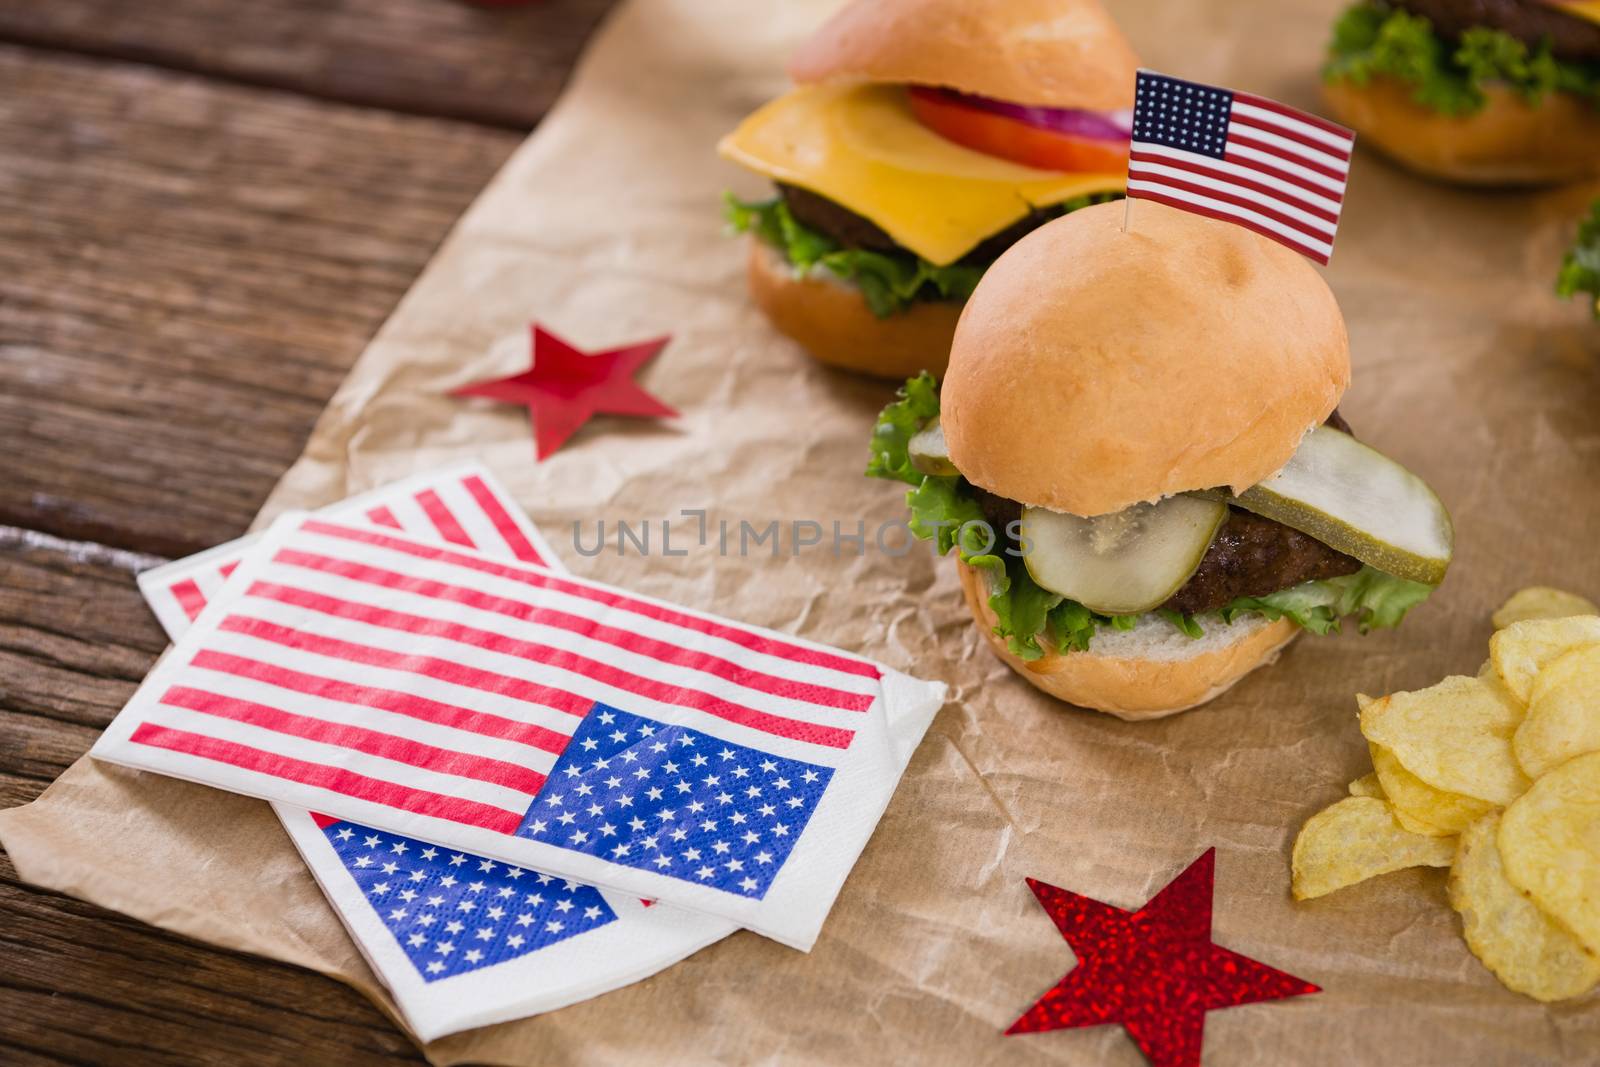 Burger and potato chips decorated with 4th july theme on wooden table